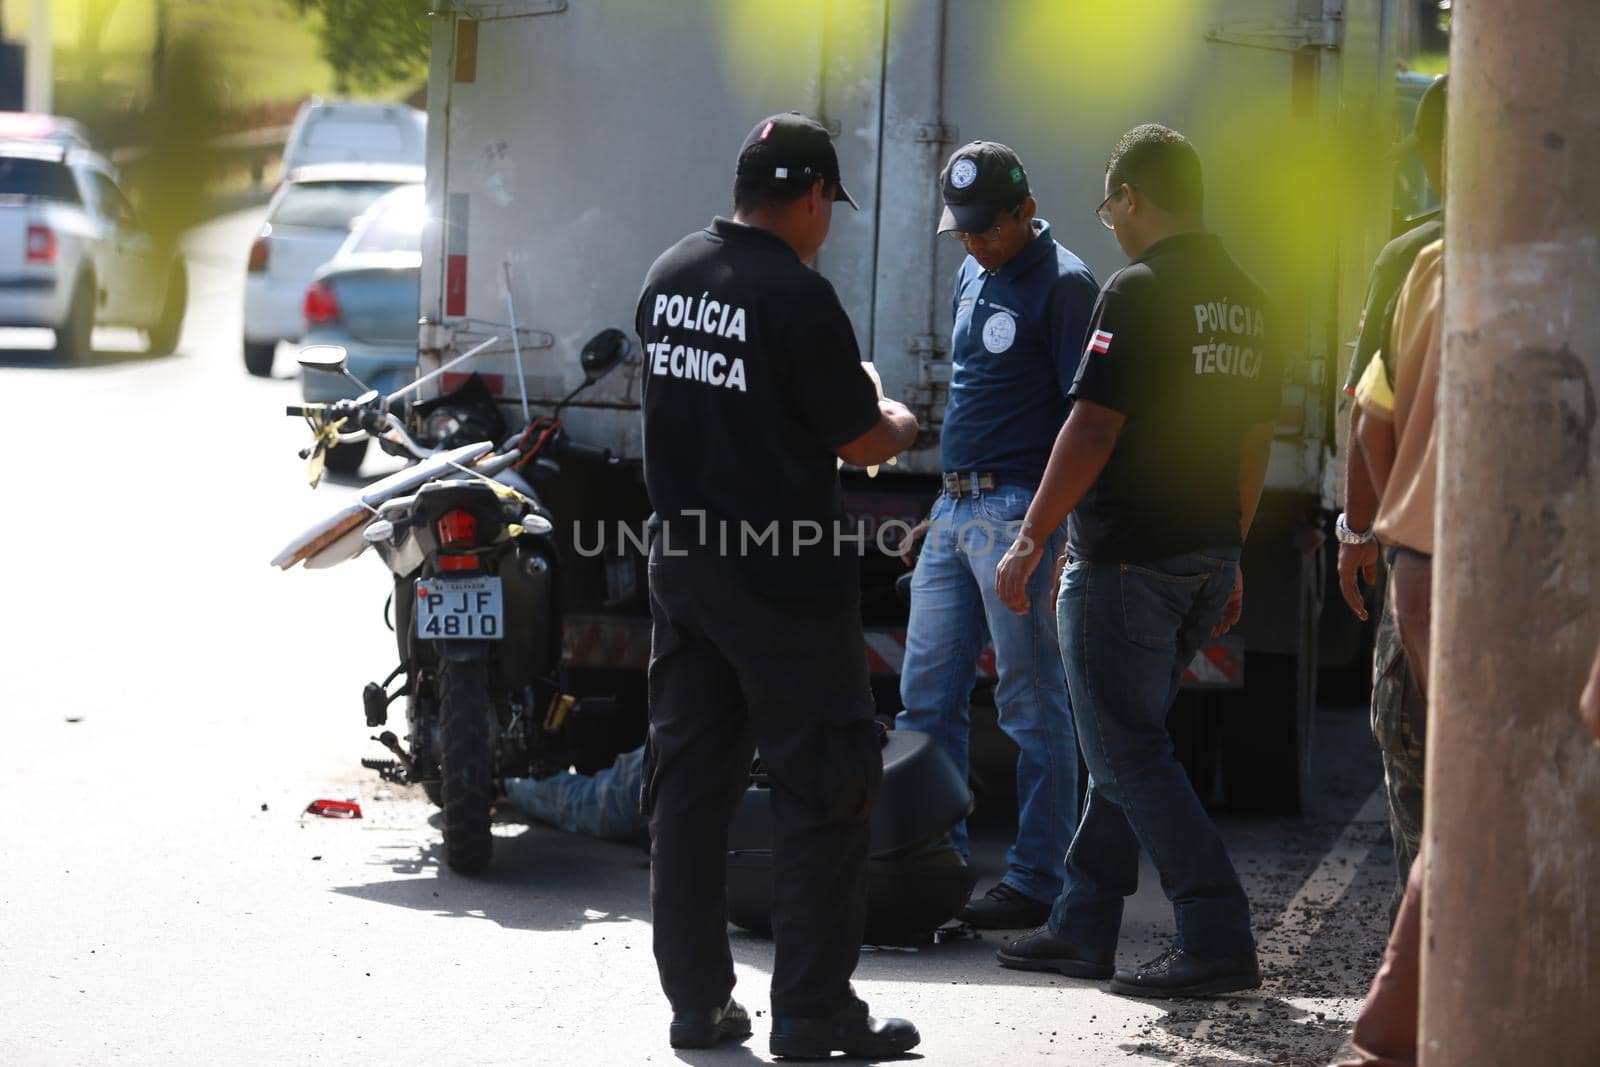 Technical Police forensic in traffic accident by joasouza